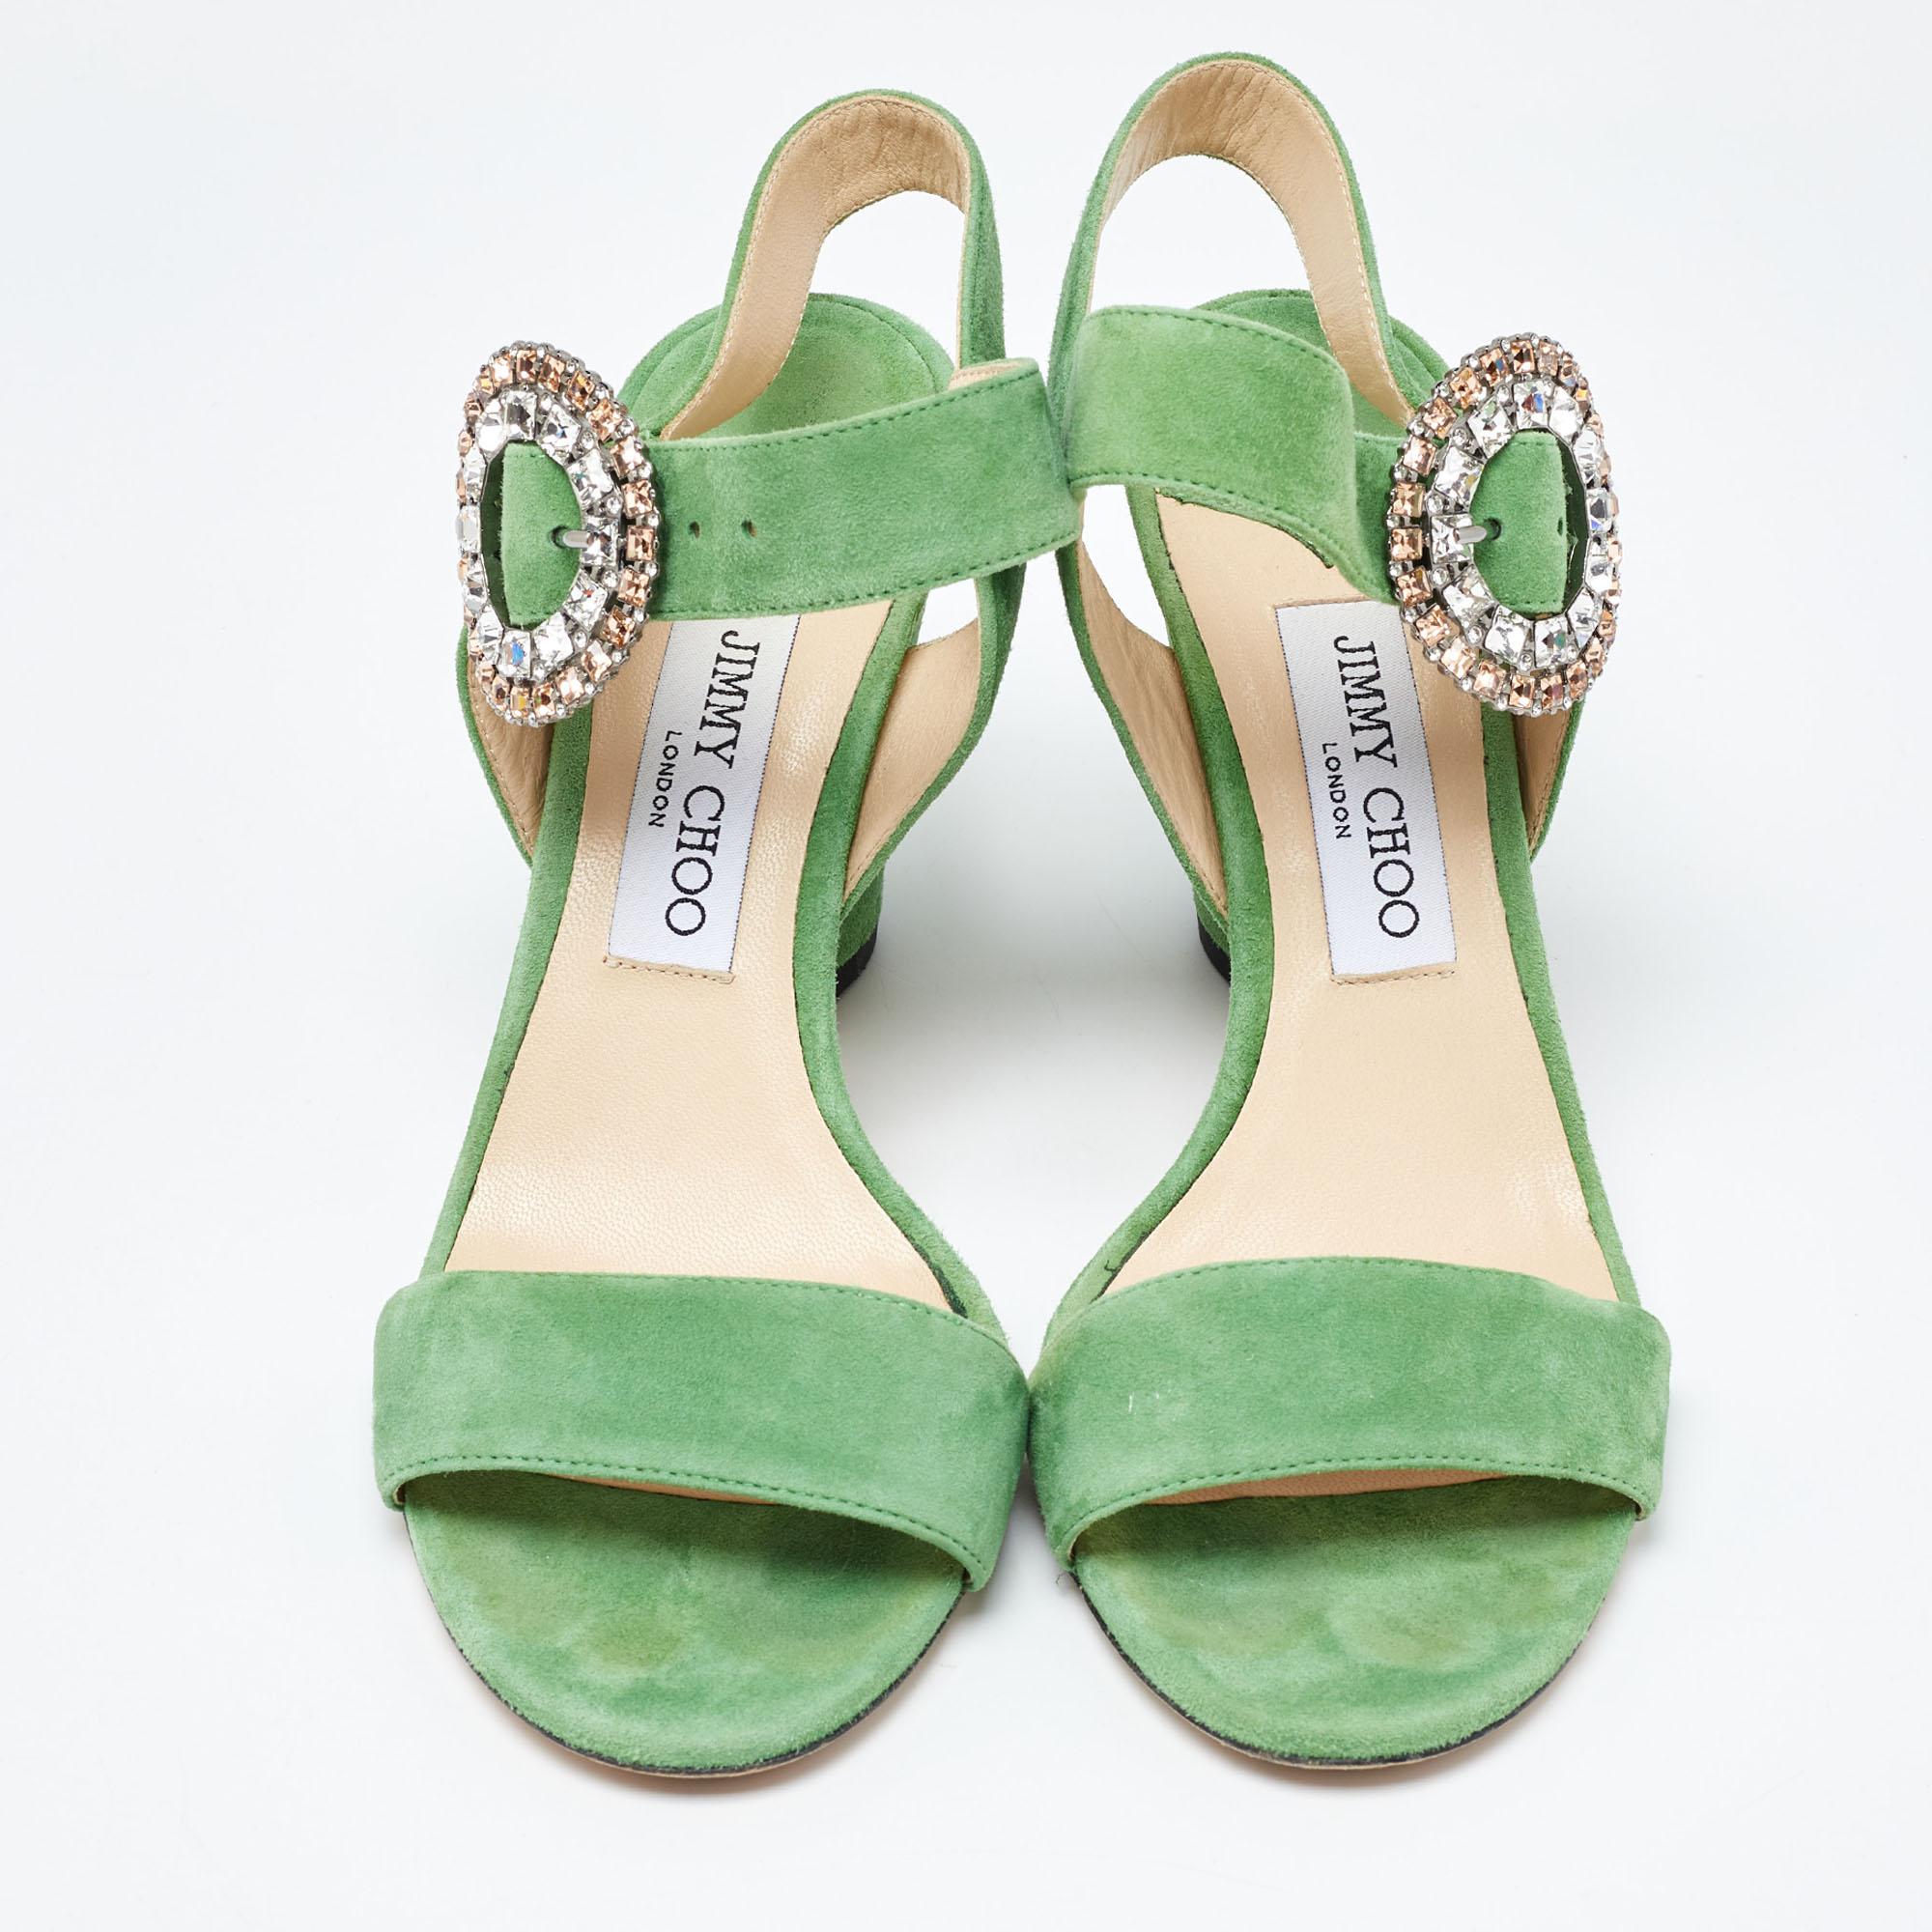 Discover footwear elegance with these Jimmy Choo green women's sandals. Meticulously designed, these heels marry fashion and comfort, ensuring you shine in every setting.

